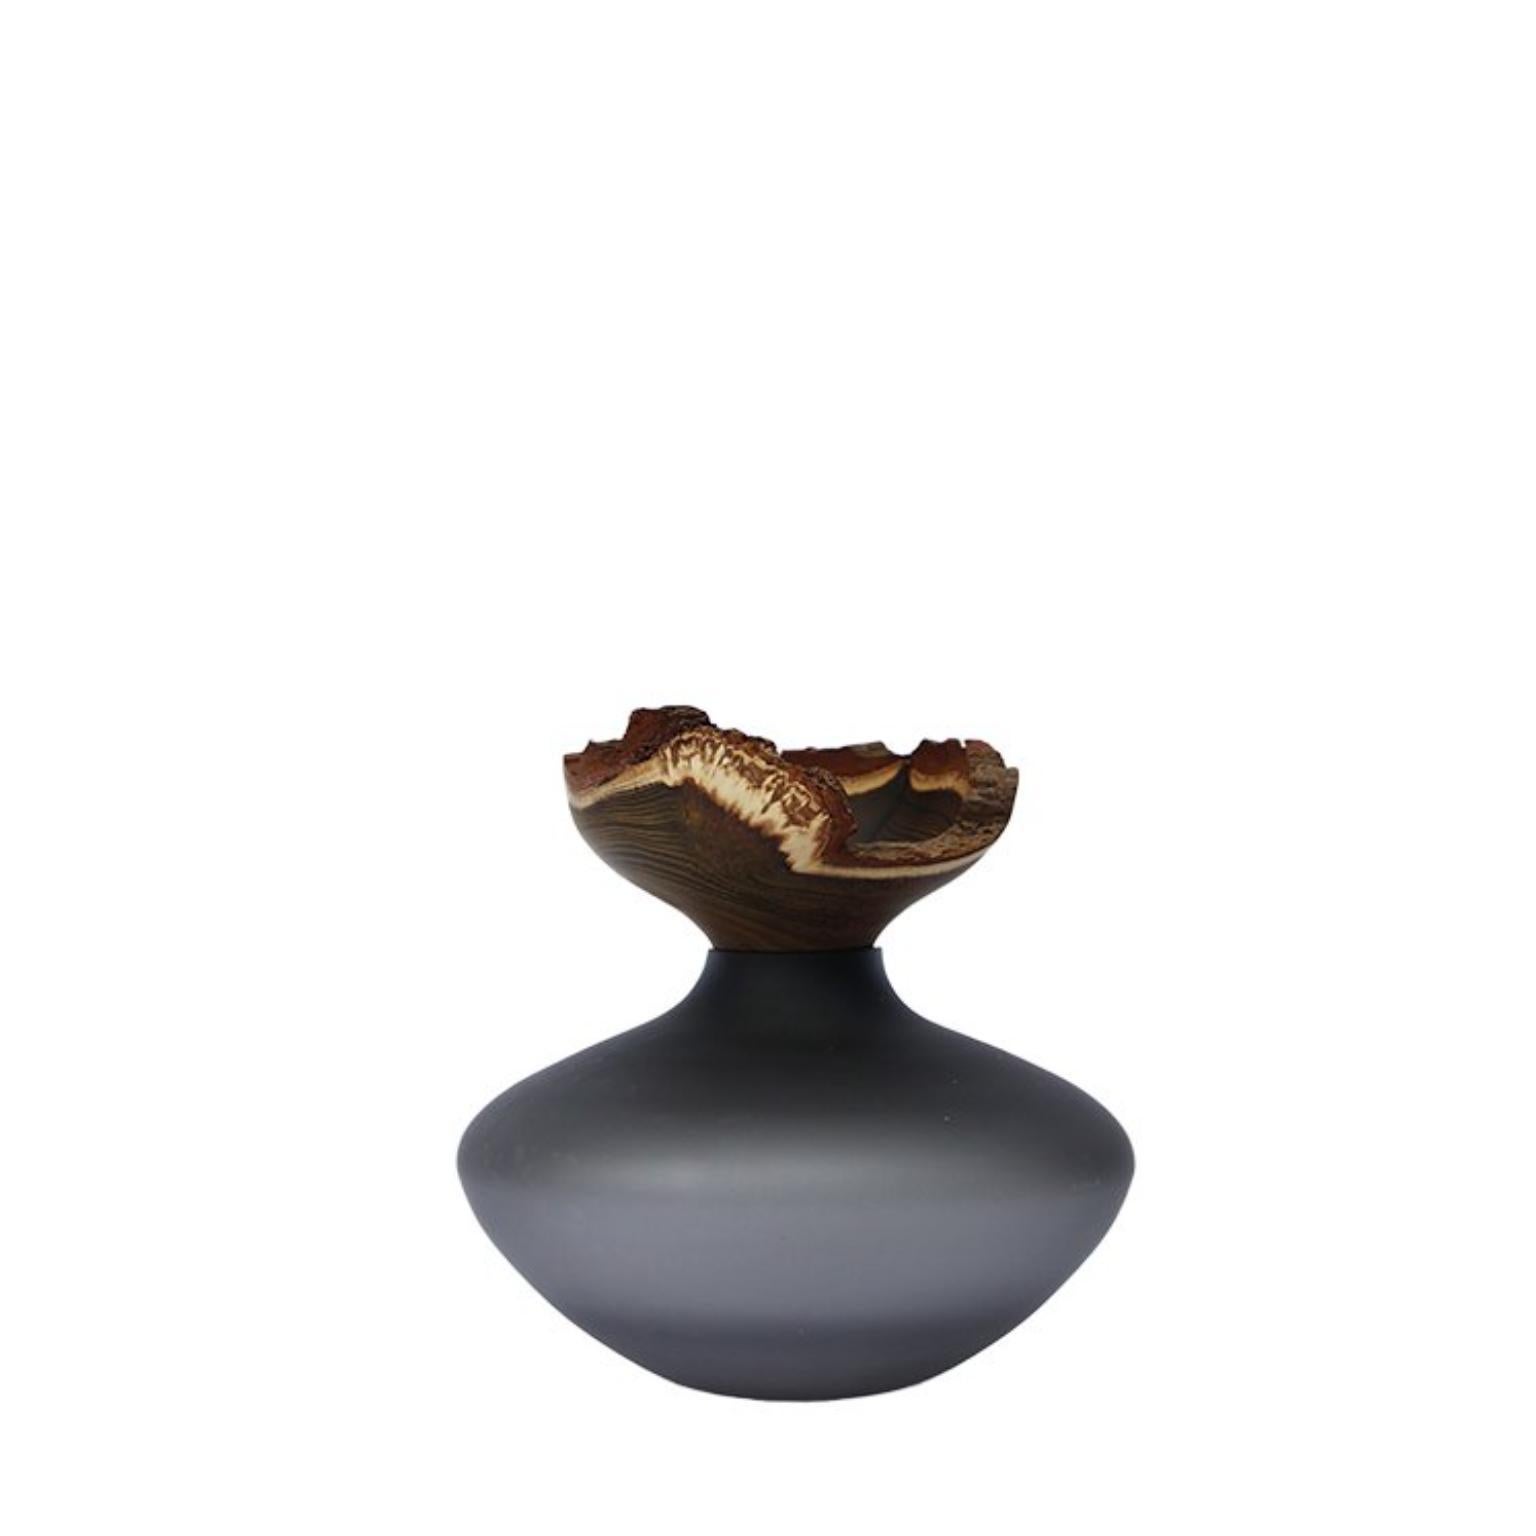 Bloom Stacking Satin Opalin Vessel by Pia Wüstenberg In New Condition For Sale In Geneve, CH